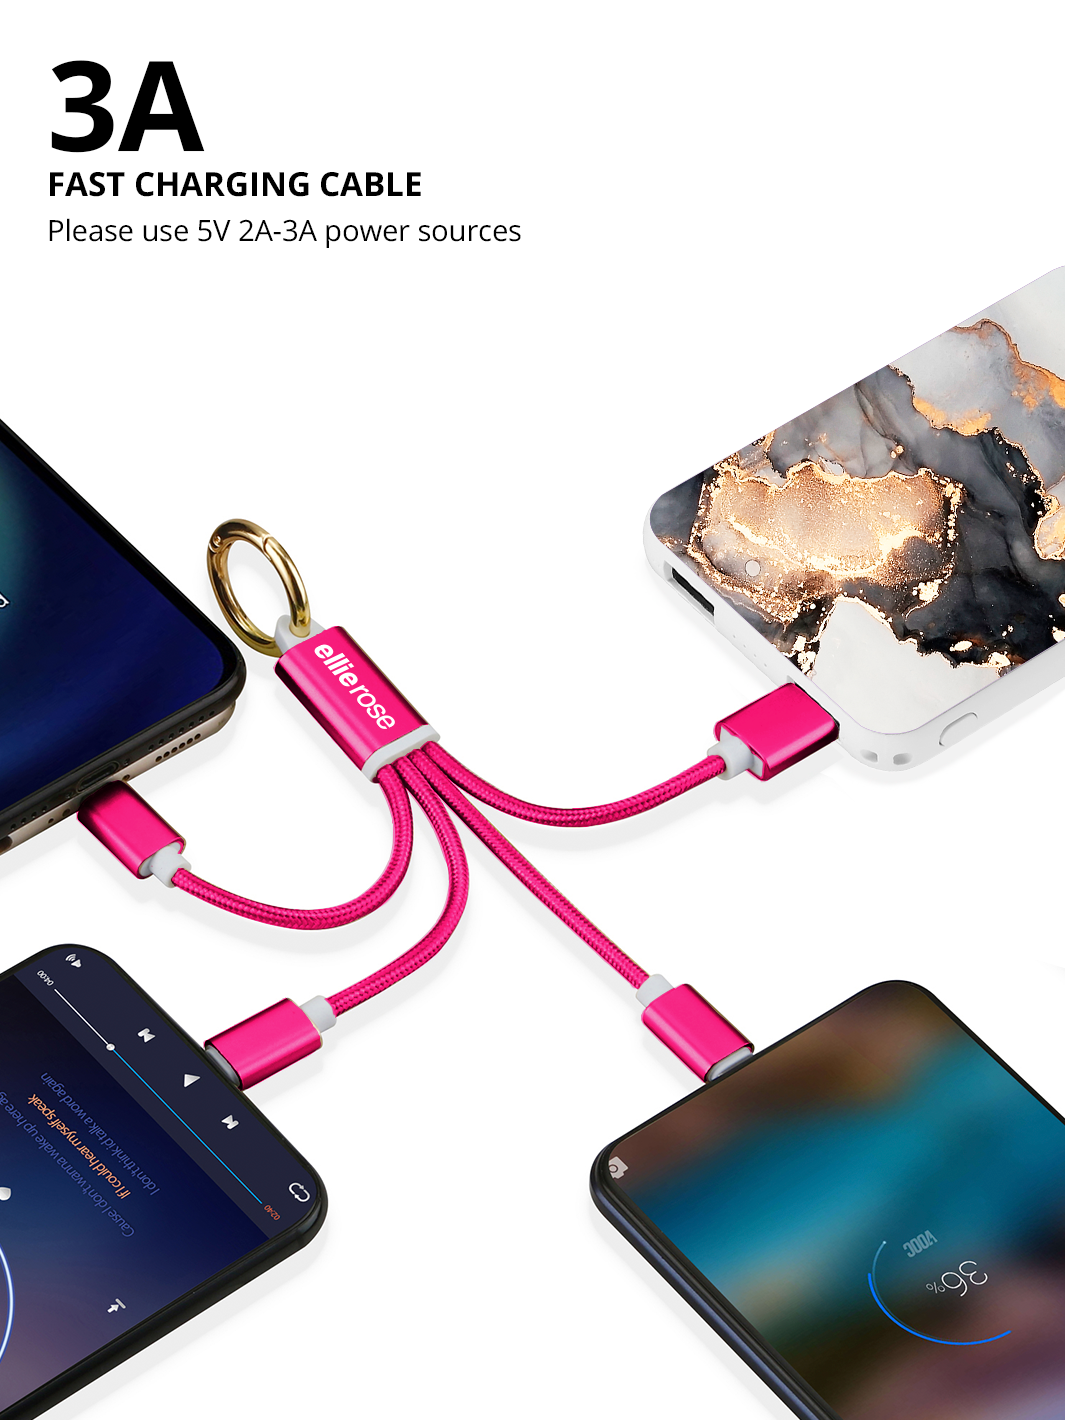 Hot Pink 3-in-1 Charging Cable Keychain